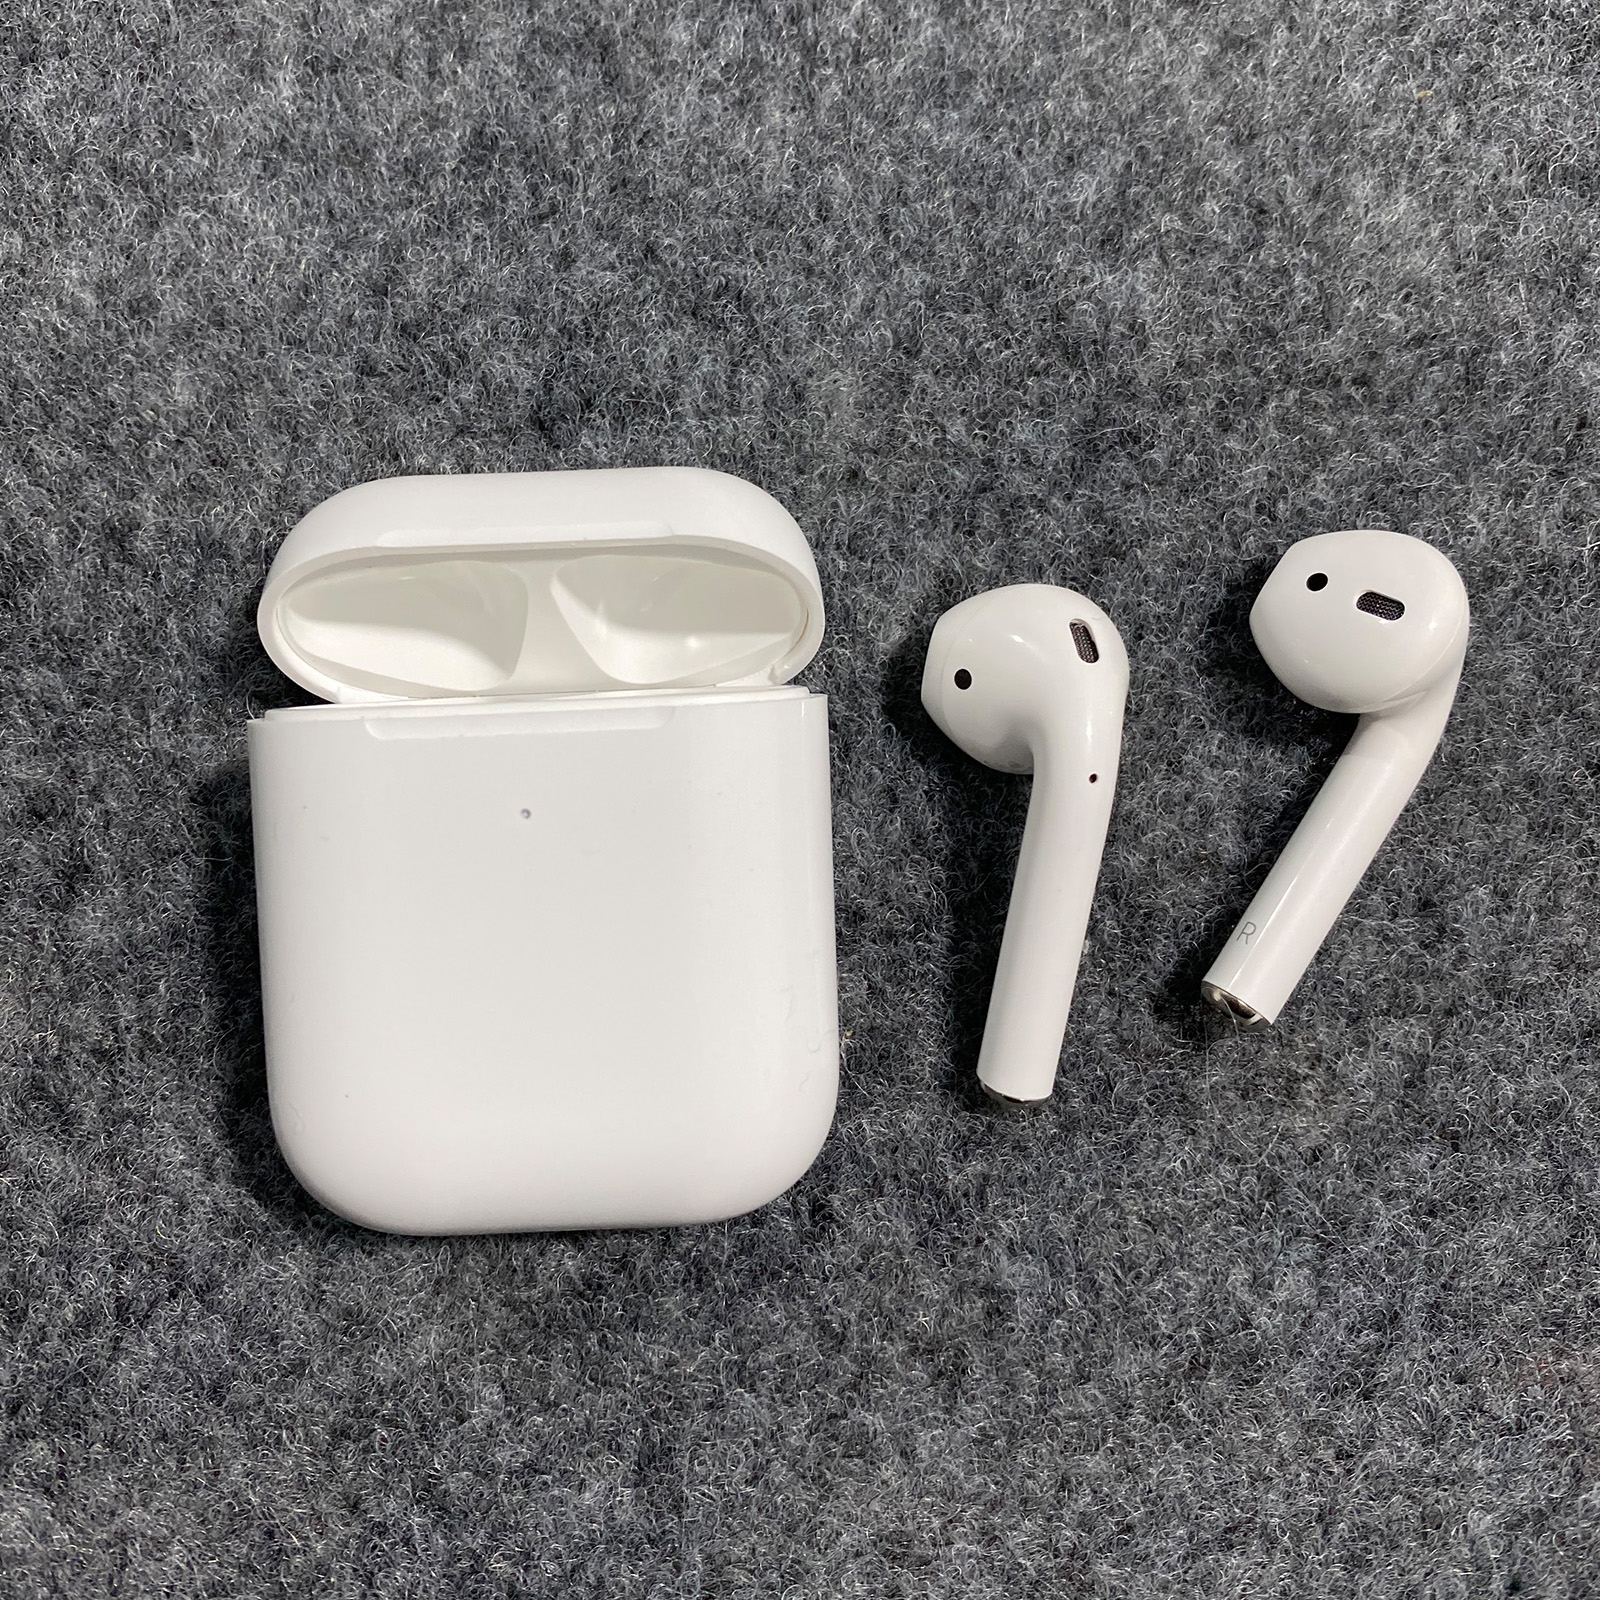 AirPods2 in mint